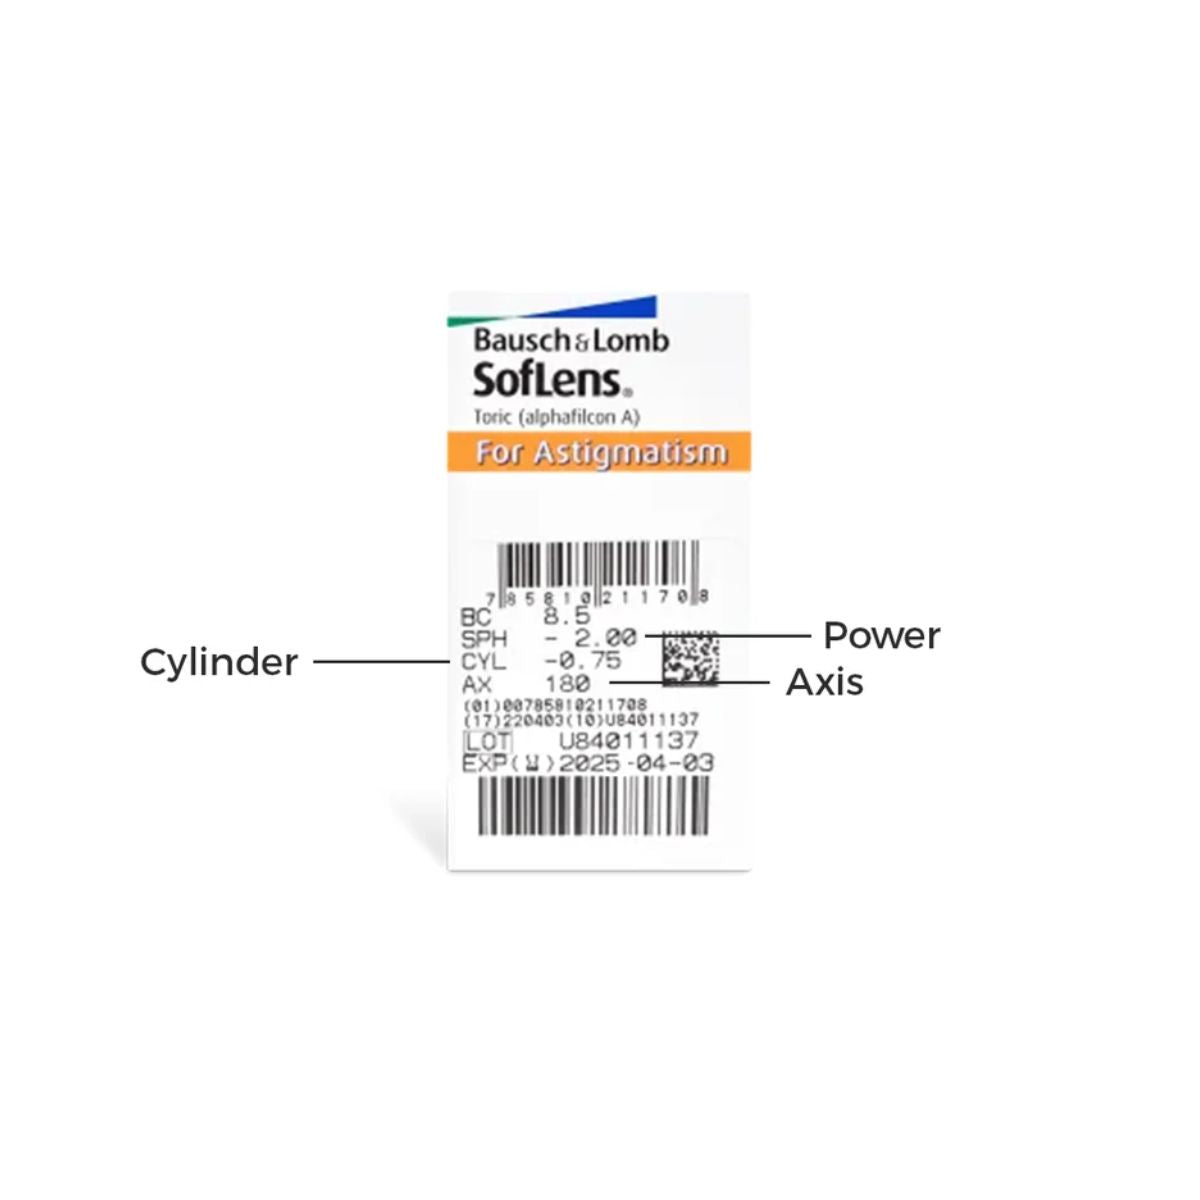 "SofLens Toric Monthly Dsposable for Astigmatism (6 Lens Pack) Contact lenses"